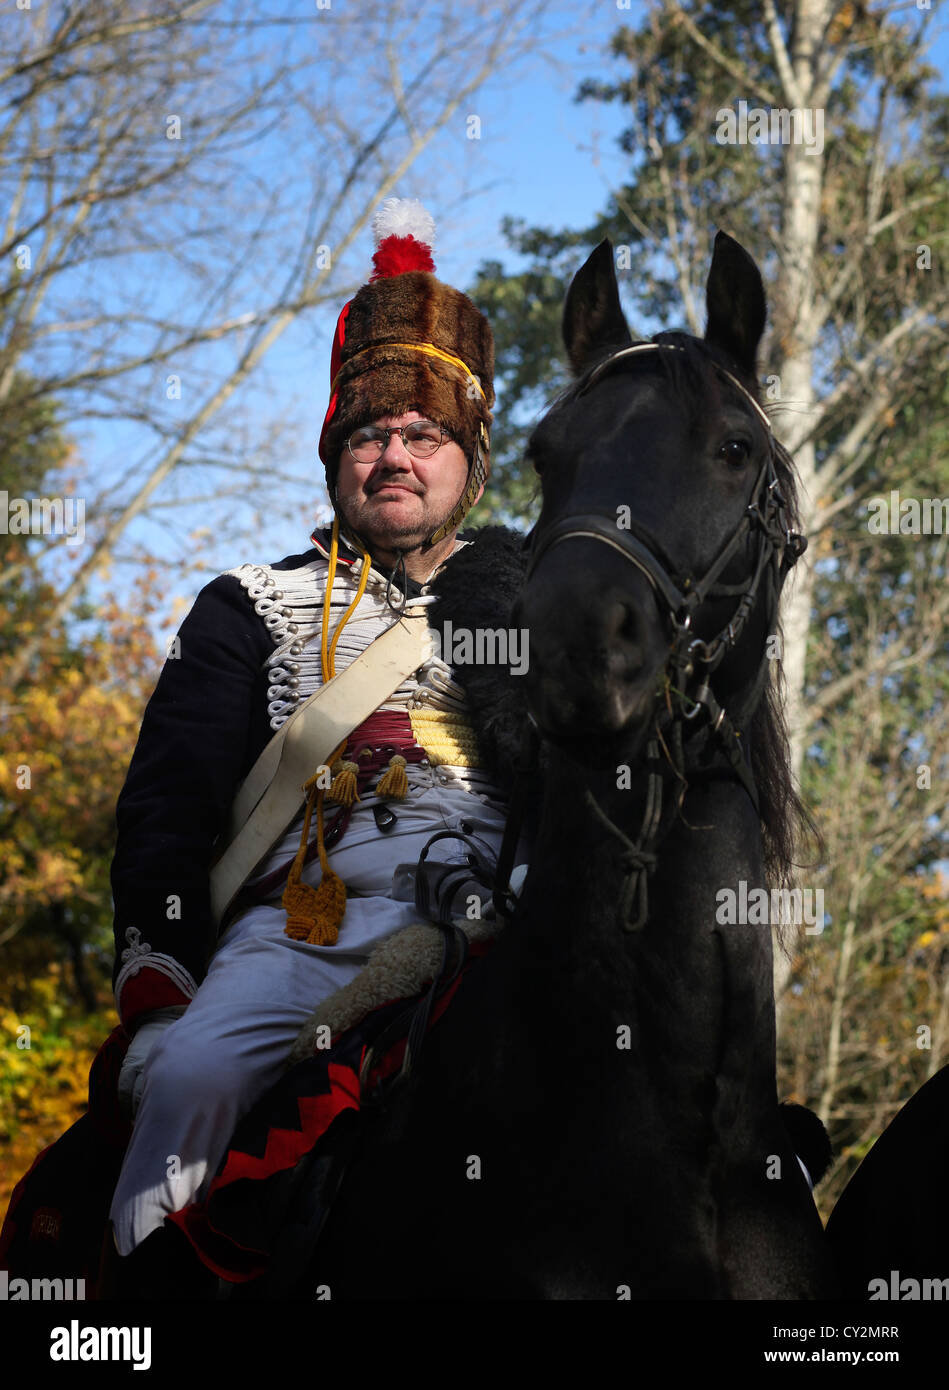 Hussar on horseback during the reenactment of the Battle of Leipzig or Battle of the Nations on October 1813 at Leipzig, Germany Stock Photo